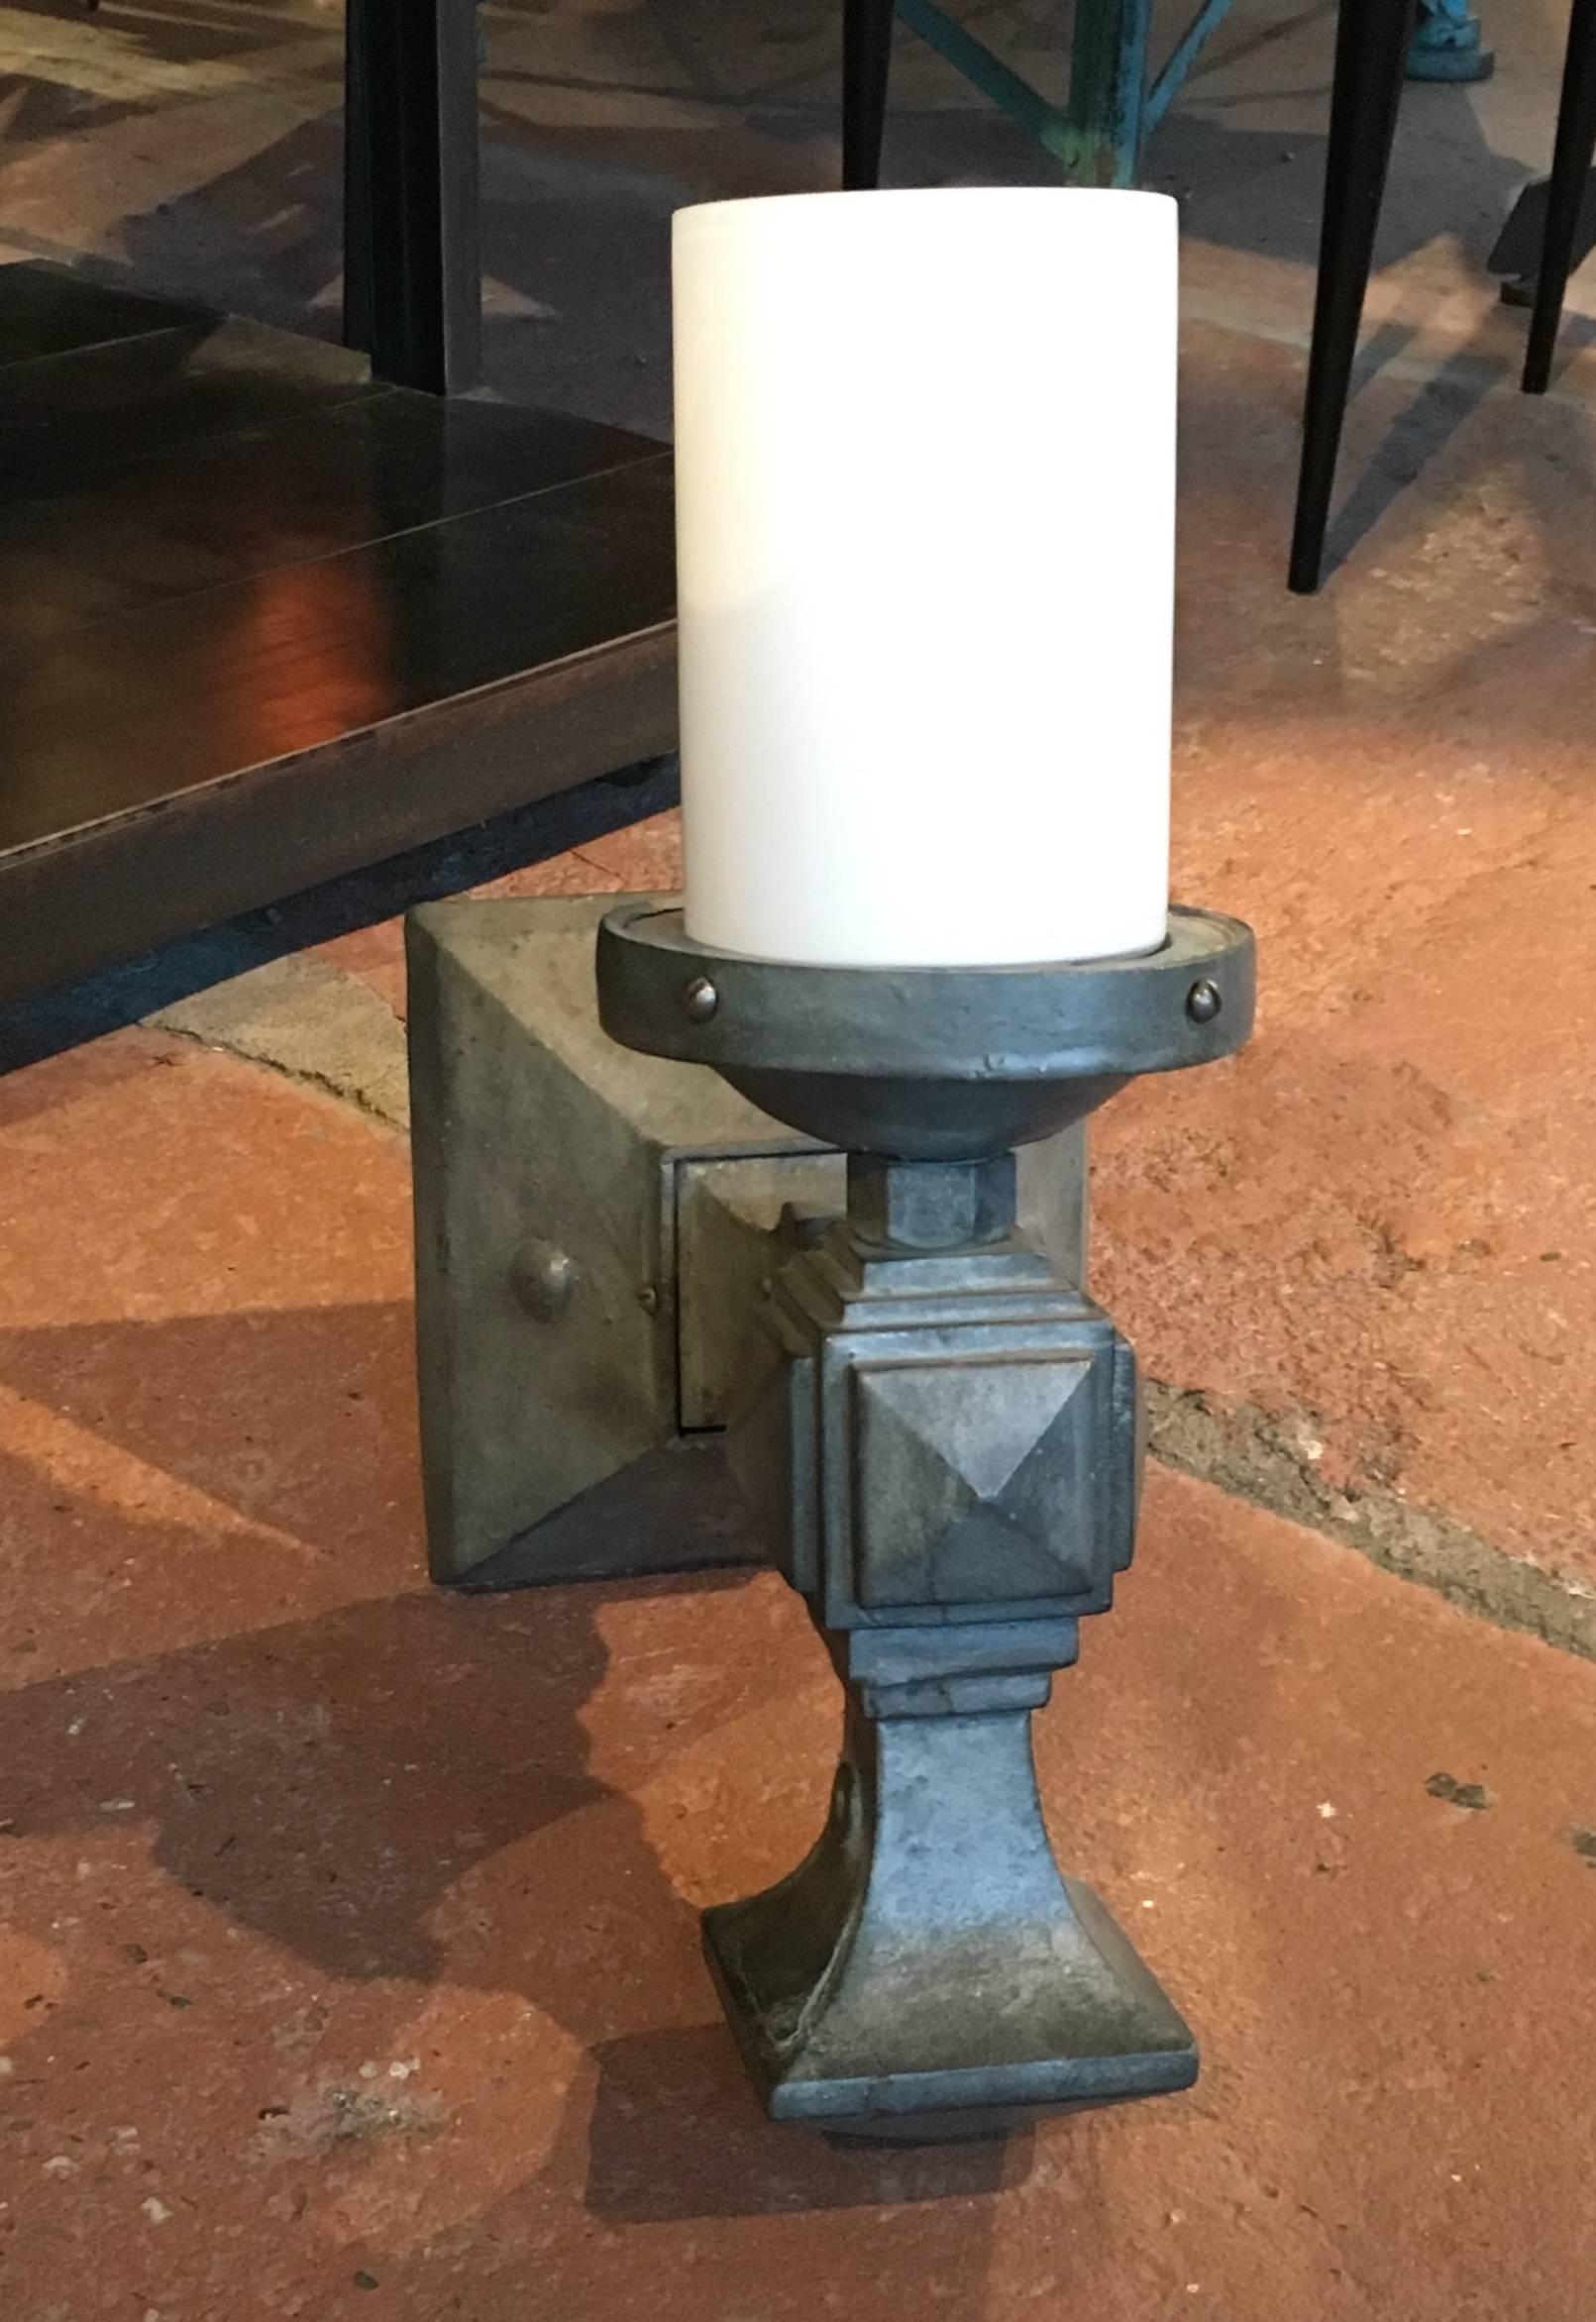 Pair of substantial French cast iron wall sconces, shown with white glass cylinder shade, but a variety of shades could be used.
Avantgarden Ltd. cultivates unexpected and exceptional lighting, furniture and design. To view items in person please